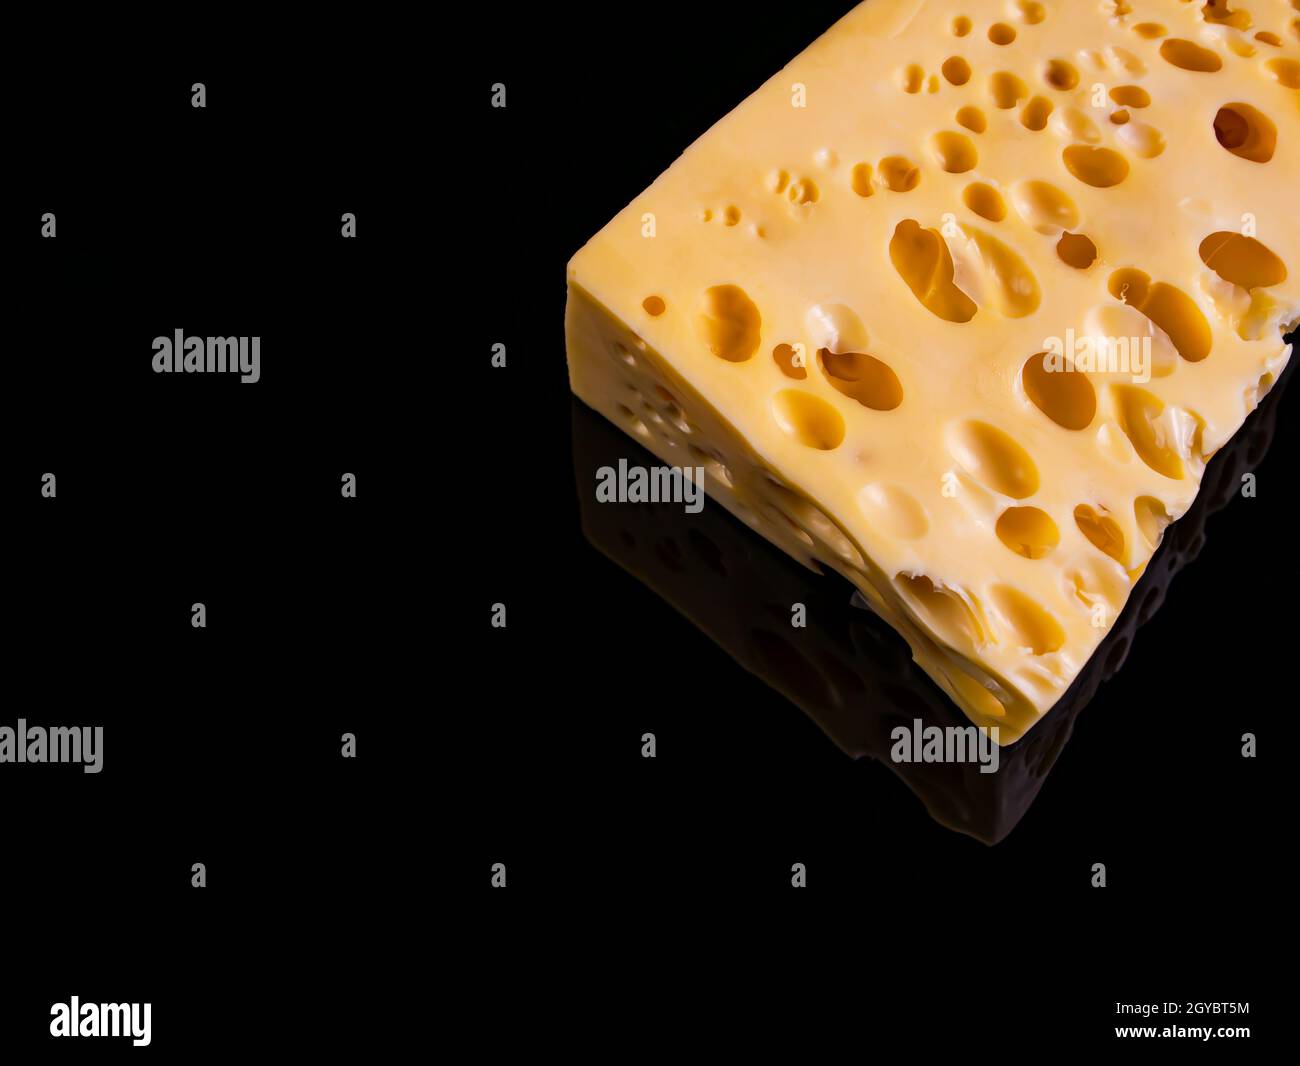 A piece of hard cheese on a black background. Hard cheeses. Milk product. Dairy products. Home kitchen. Food photo. Black background. Yellow. Healthy Stock Photo